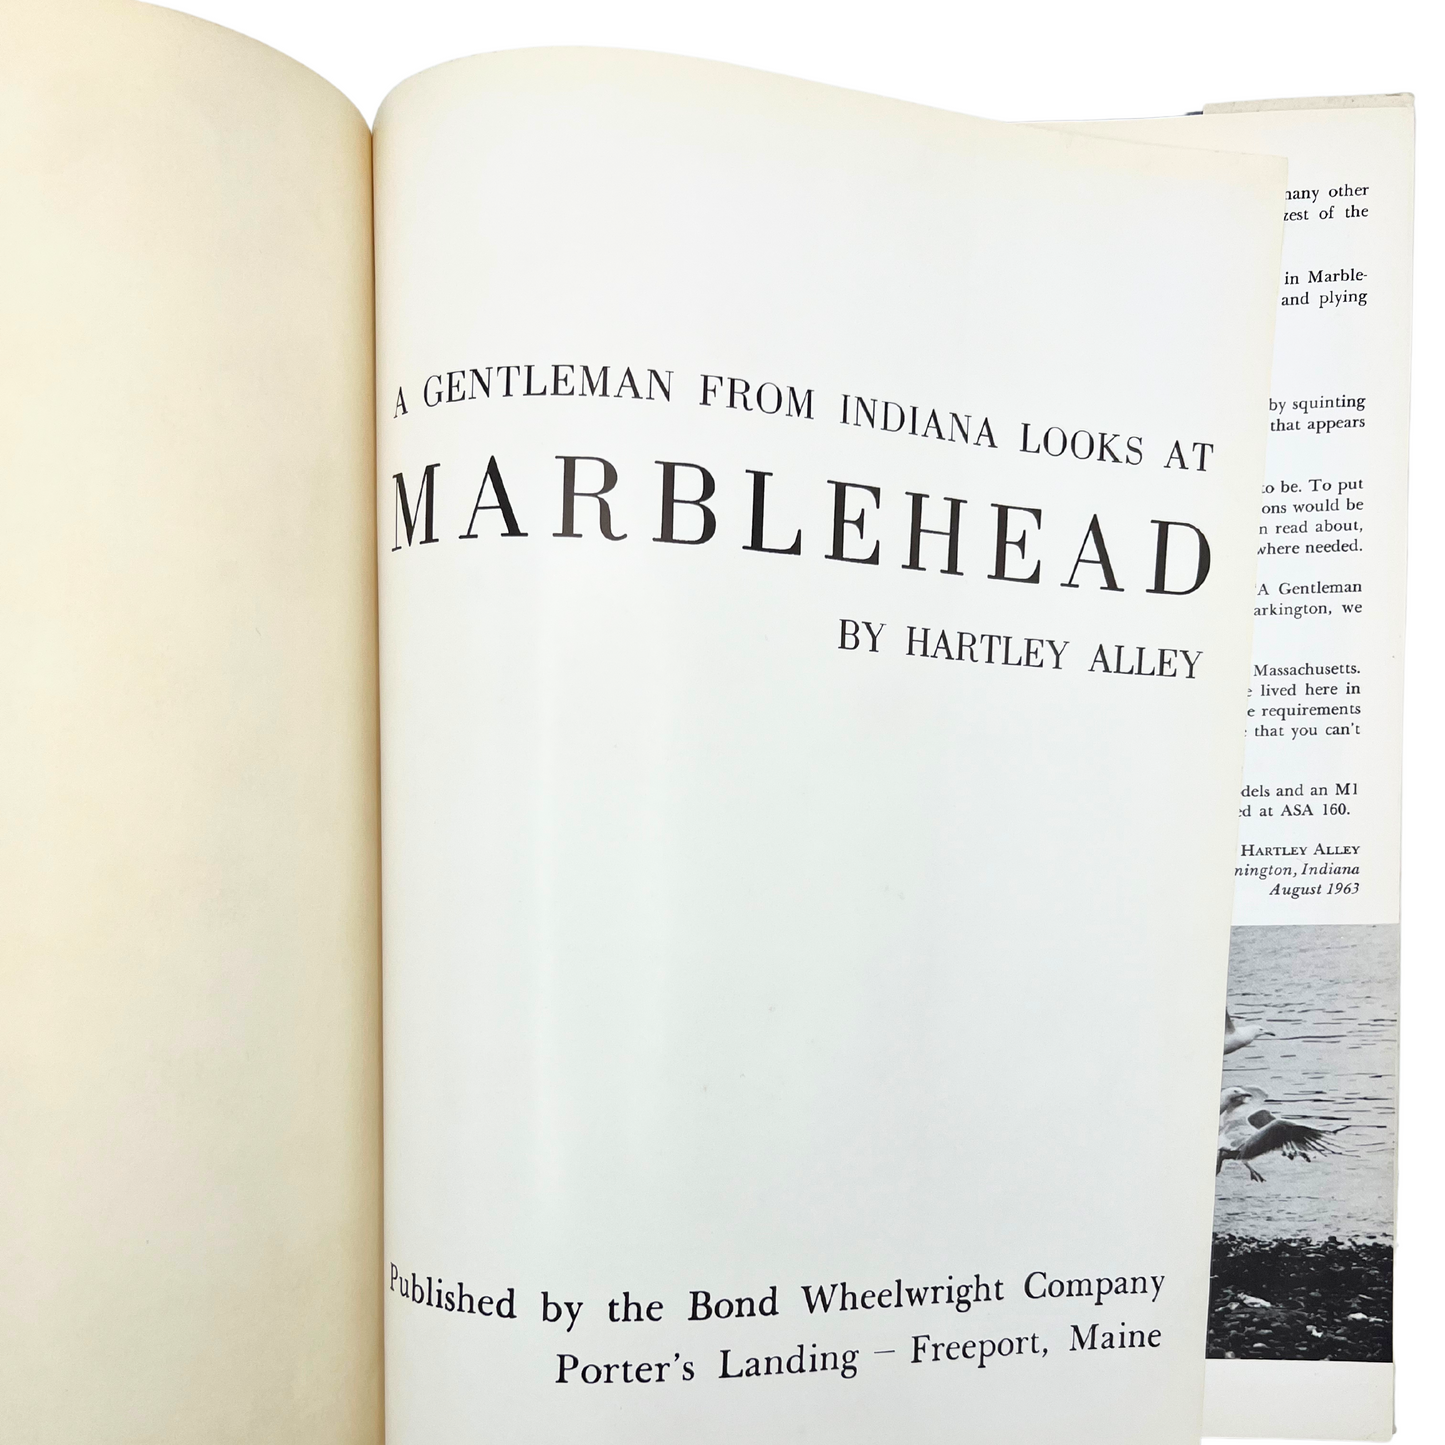 1963 book: A Gentleman from Indiana Looks at Marblehead